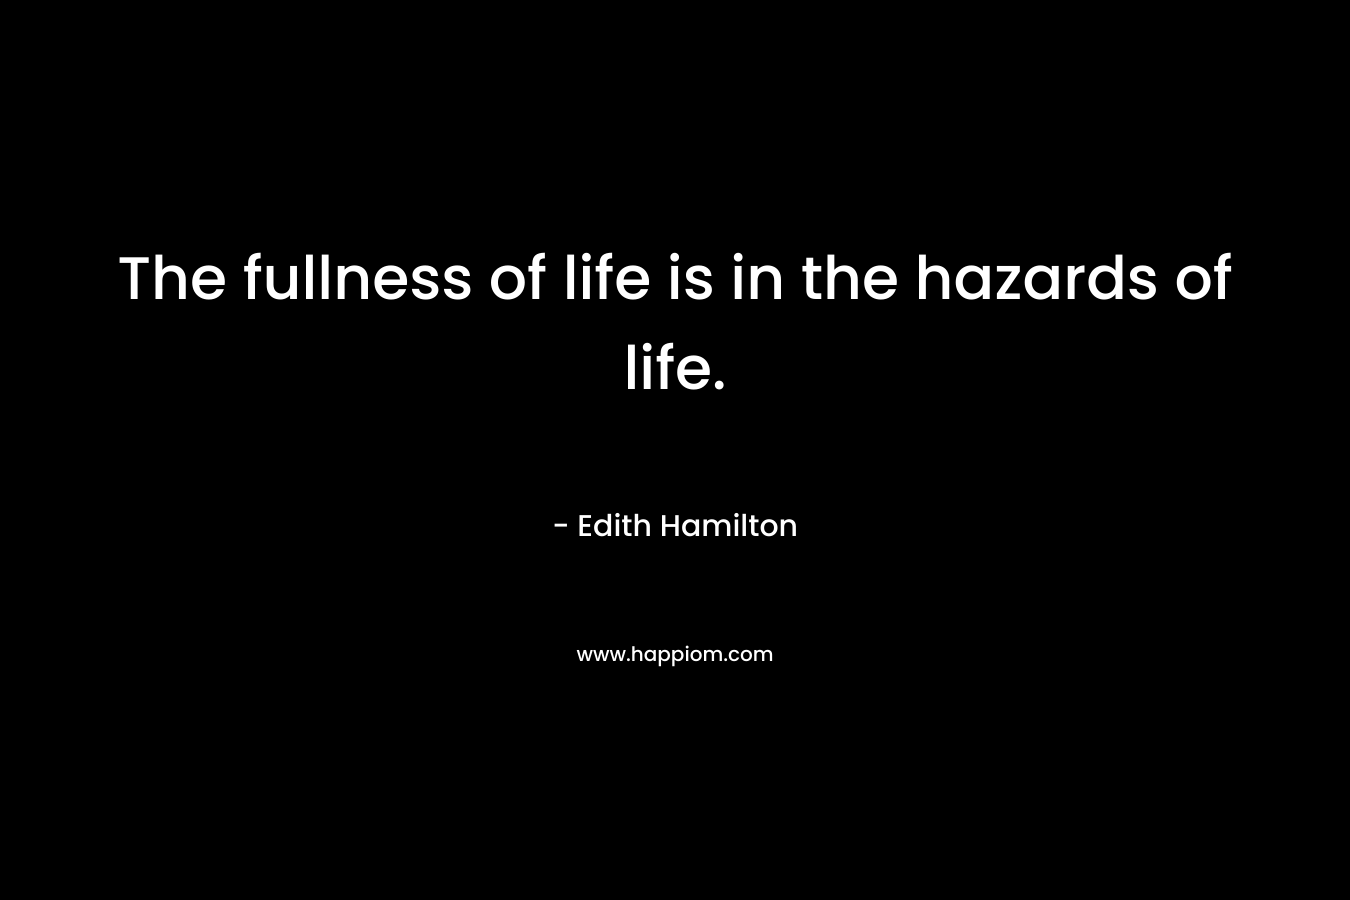 The fullness of life is in the hazards of life. – Edith Hamilton